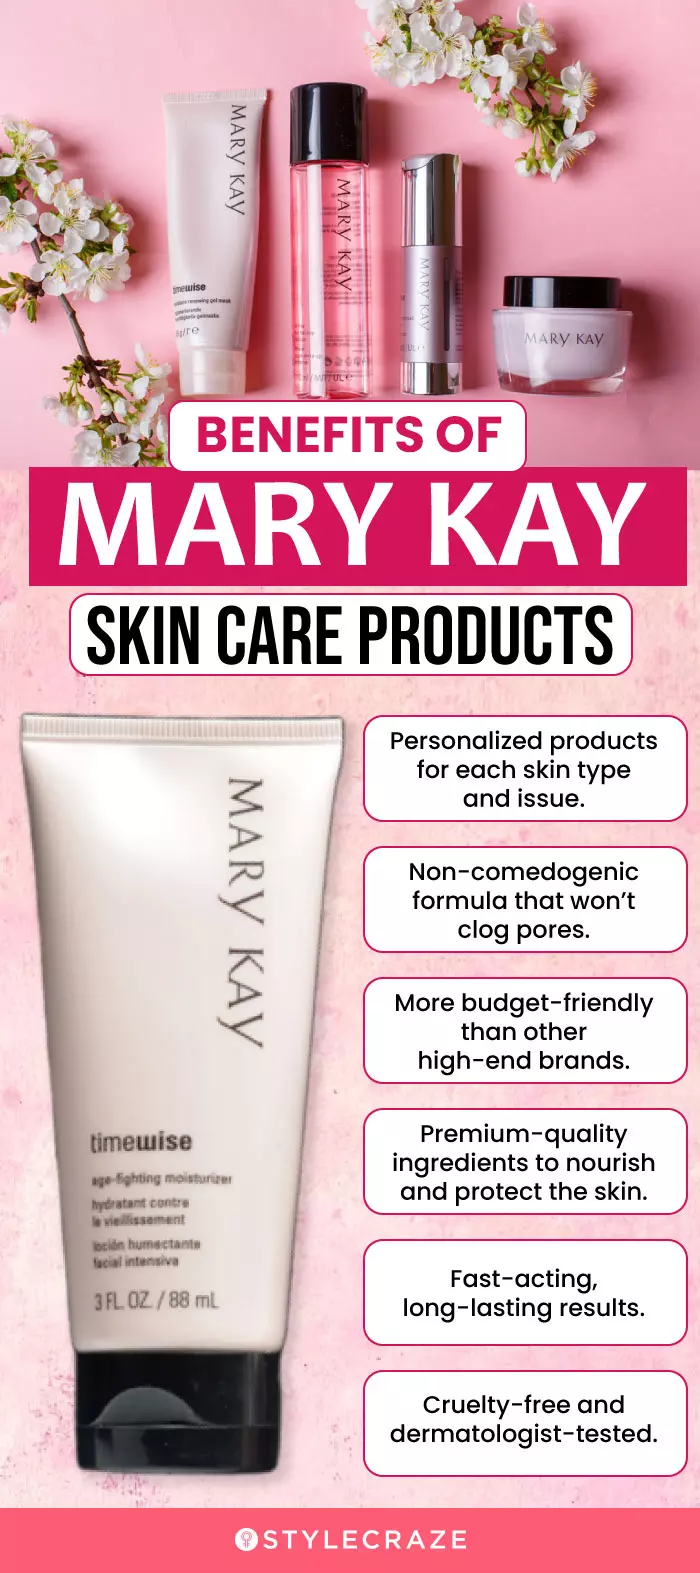 Benefits Of Using Mary Kay Skin Care Products (infographic)